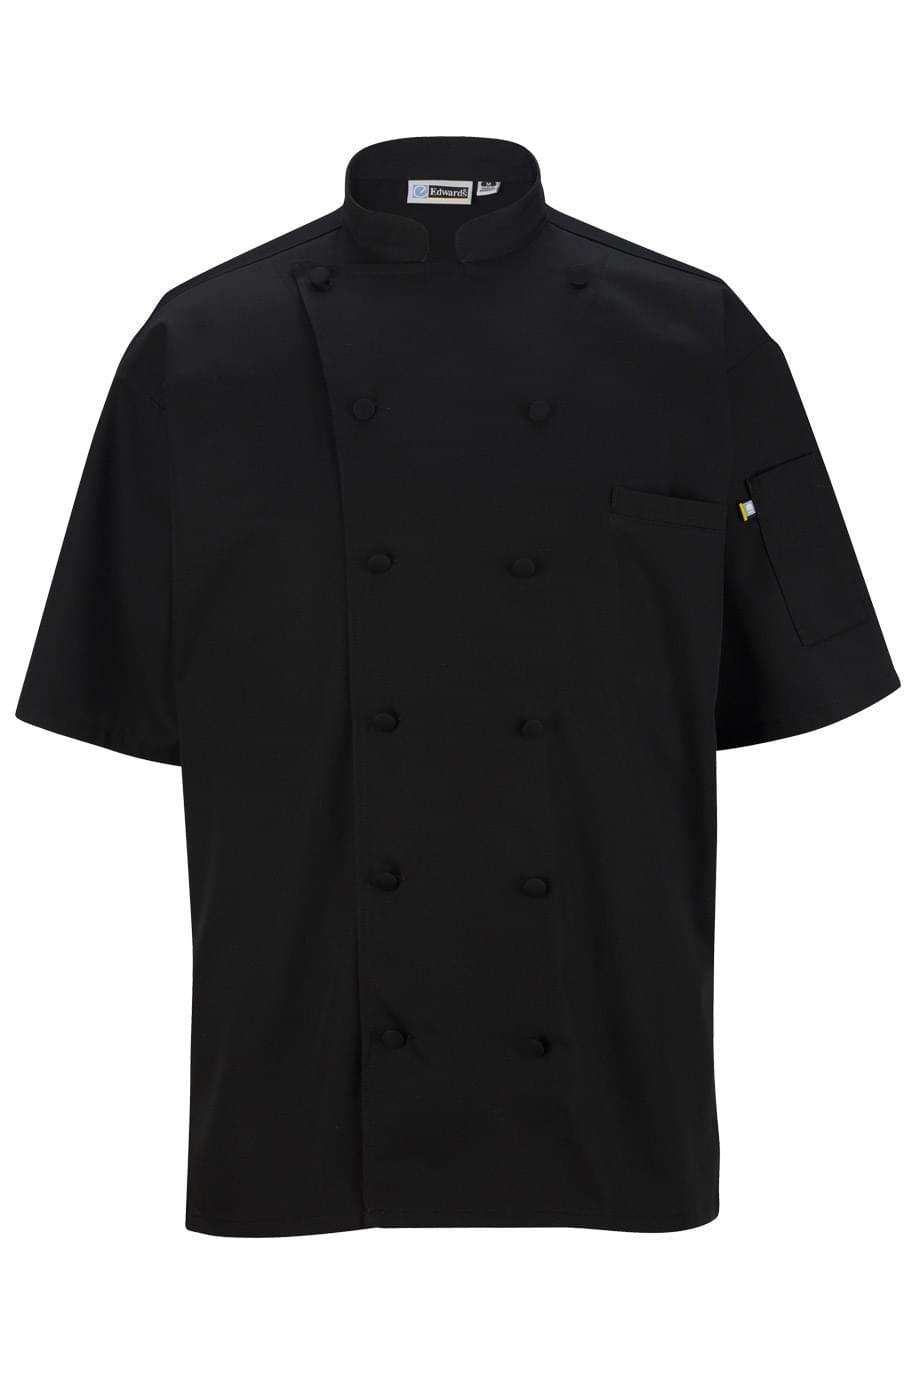 MESH BACK CHEF COAT - 12-CLOTH BUTTONS